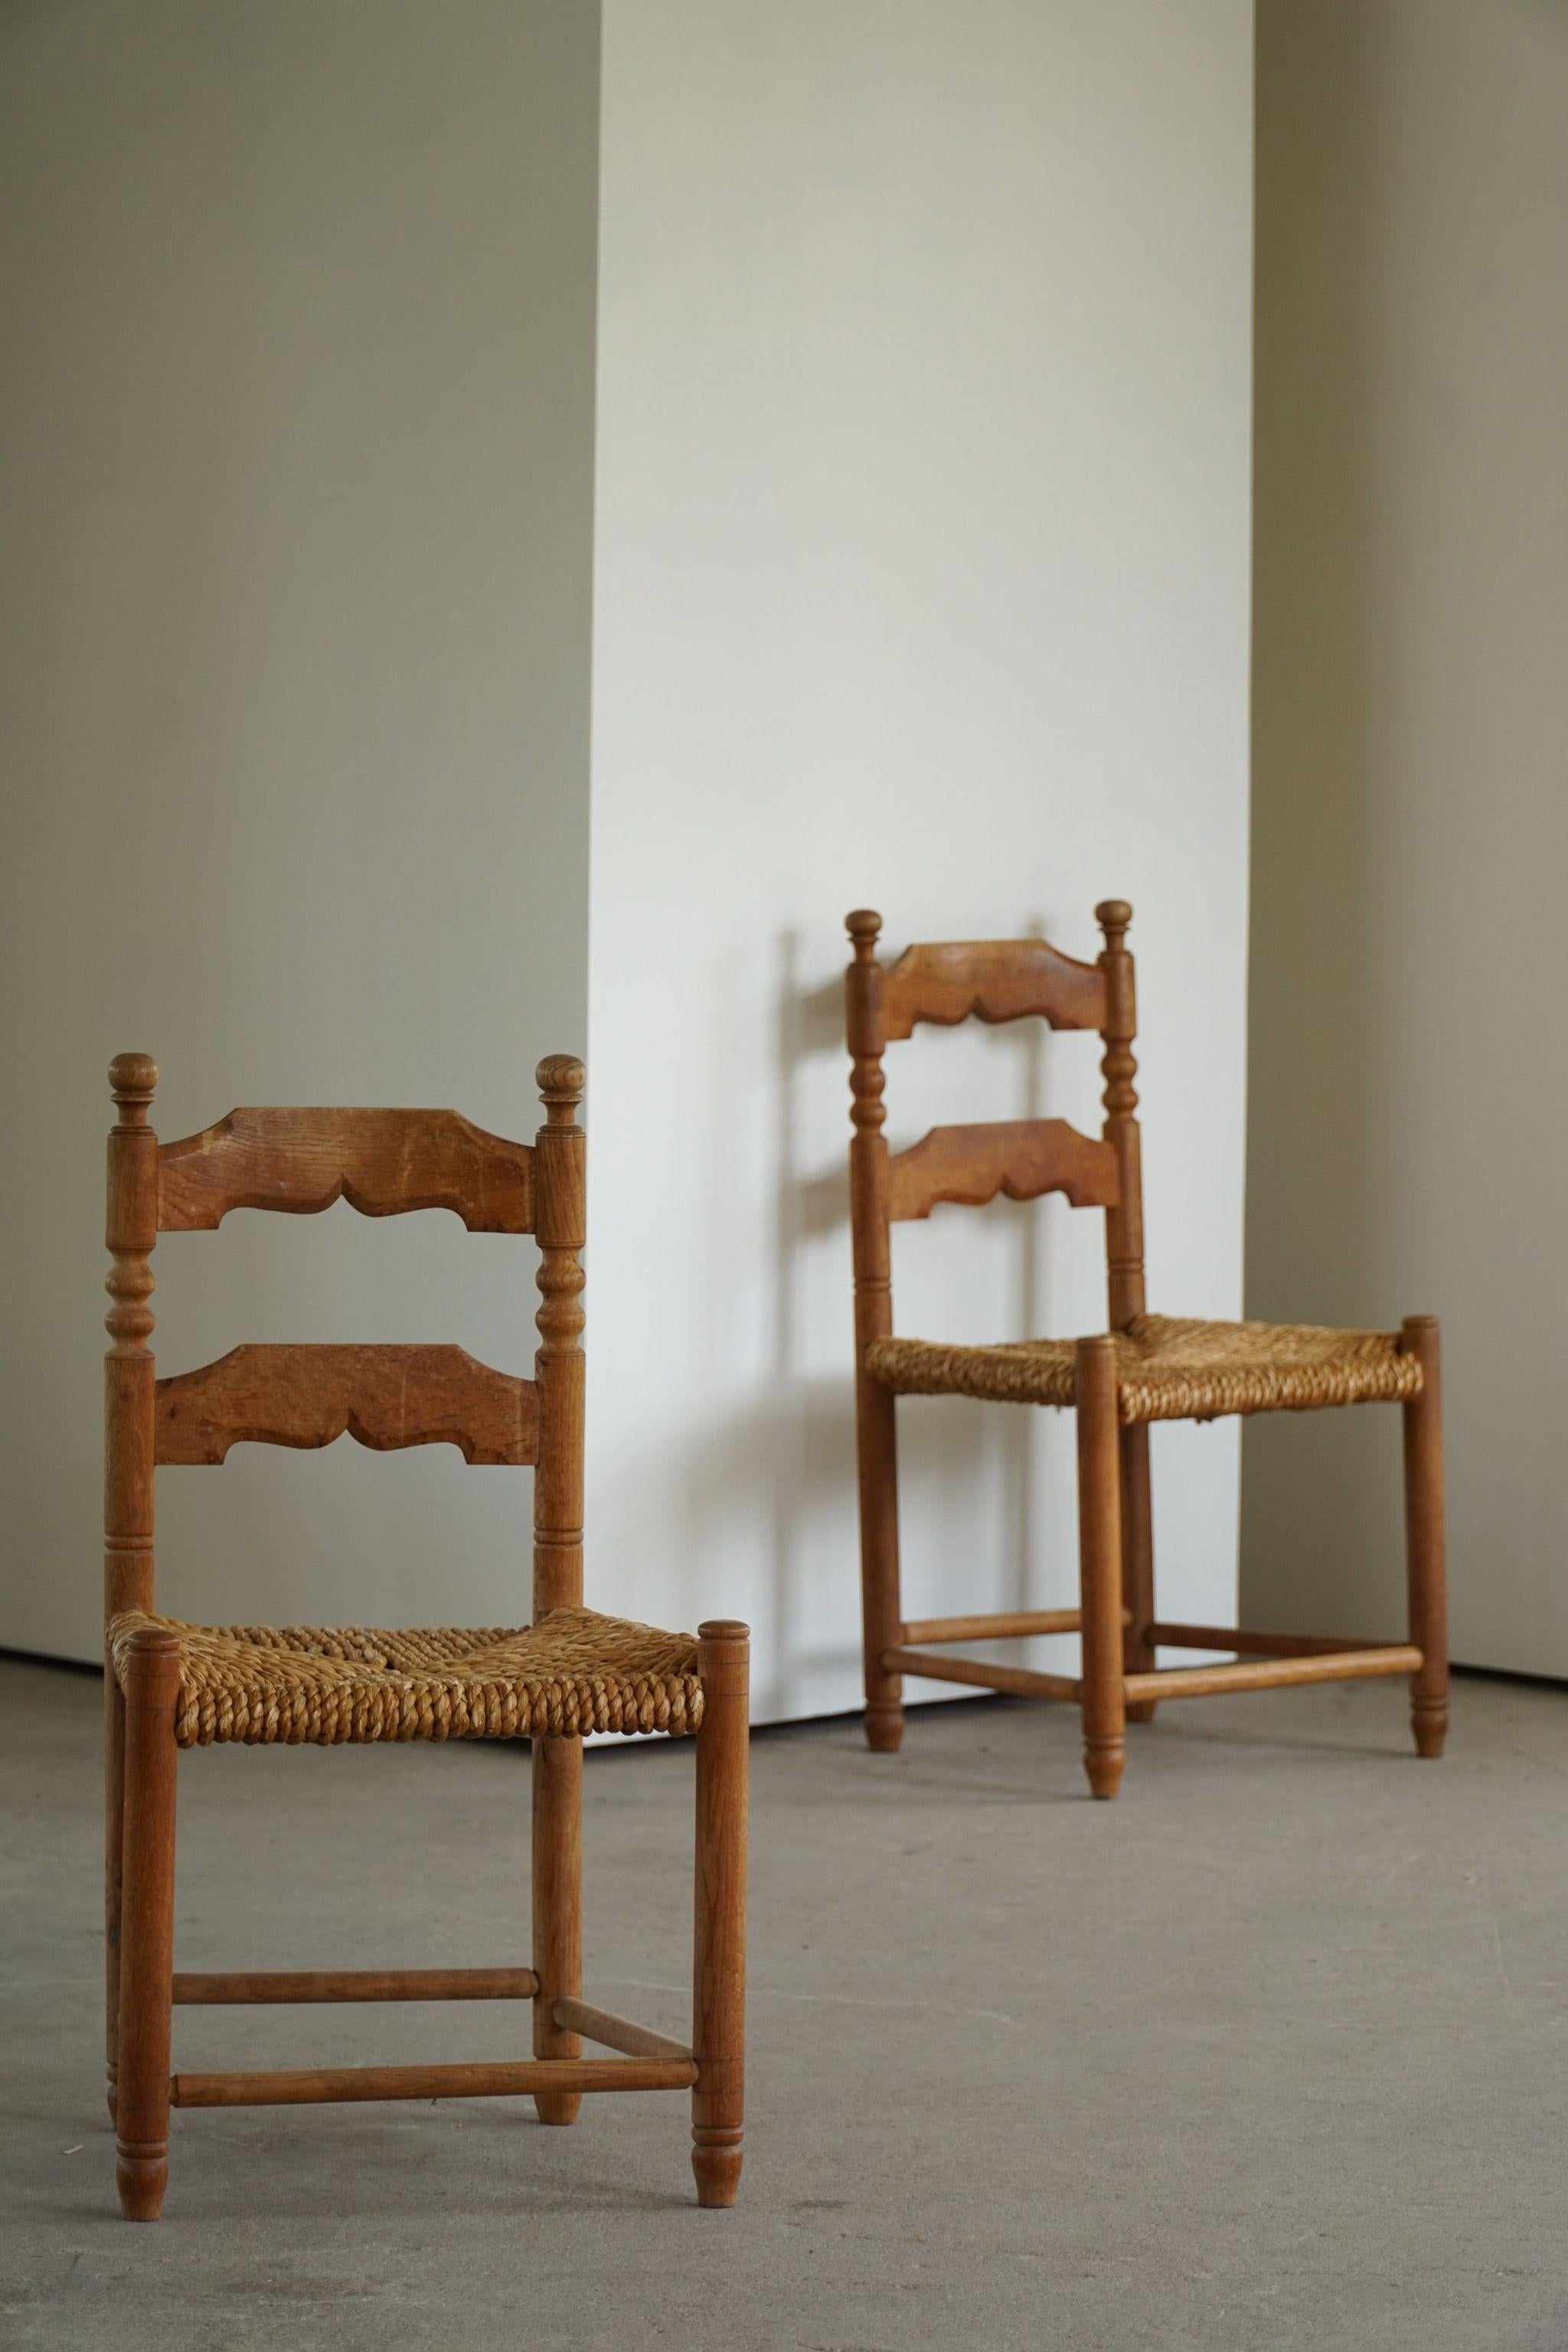 Set of 4 brutalist dining chairs in solid oak & hand woven seats of seagrass. Made by a French cabinetmaker in 1950s. A great sculptural design that match many interior styles. 

These chairs are in a good vintage condition.